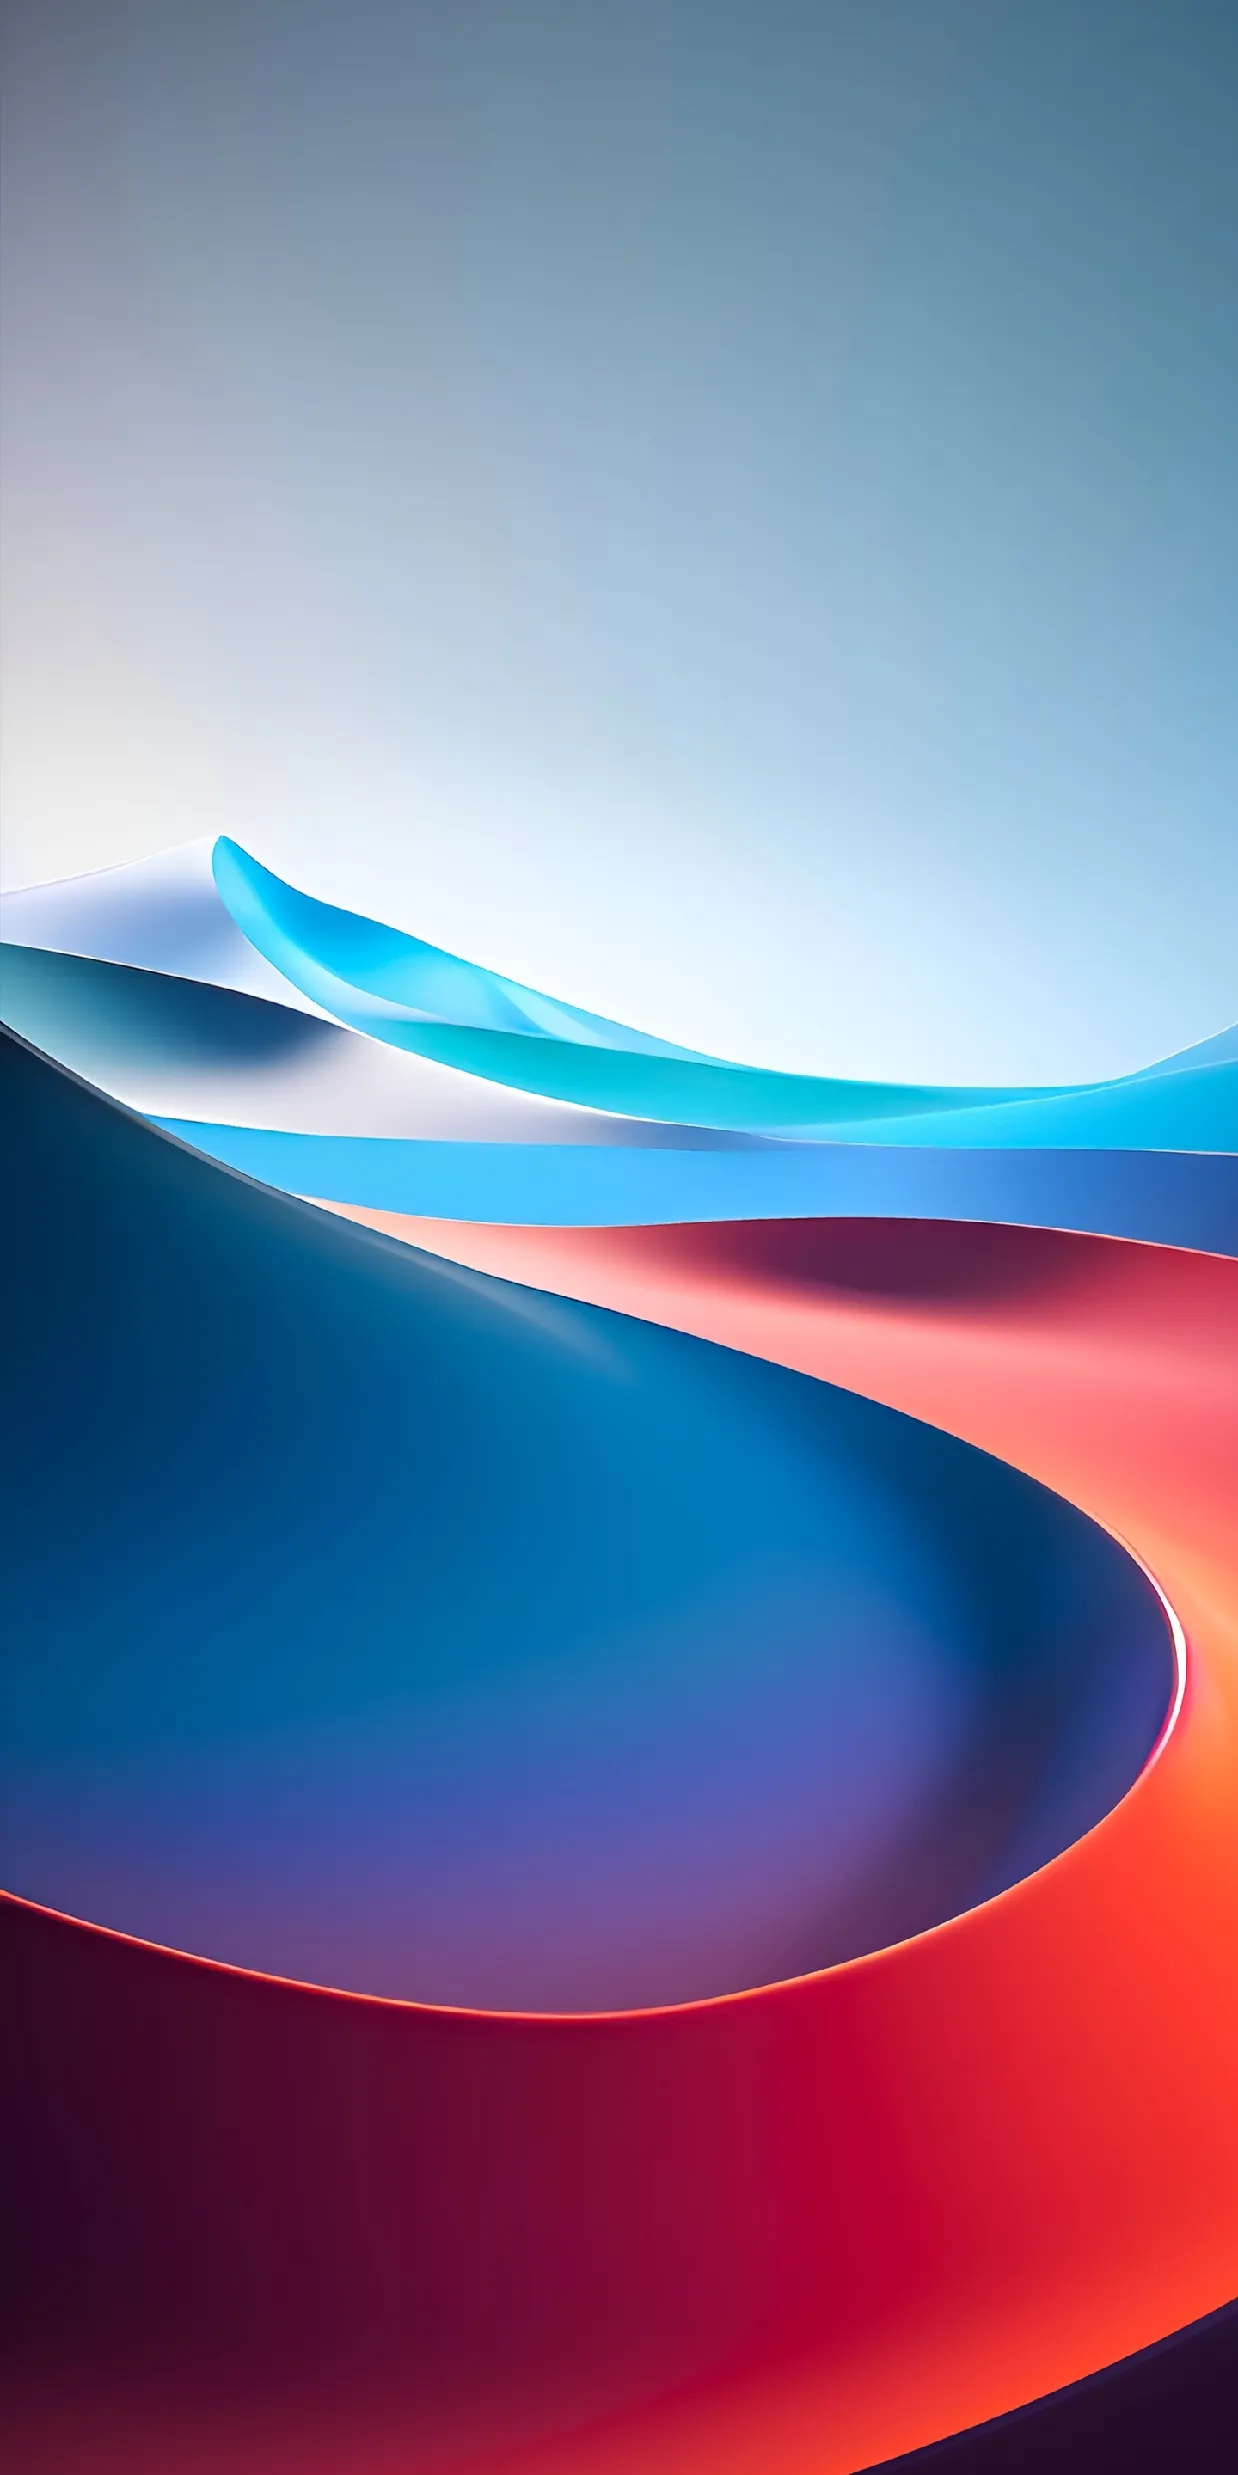 Abstract iPhone wallpaper - 079